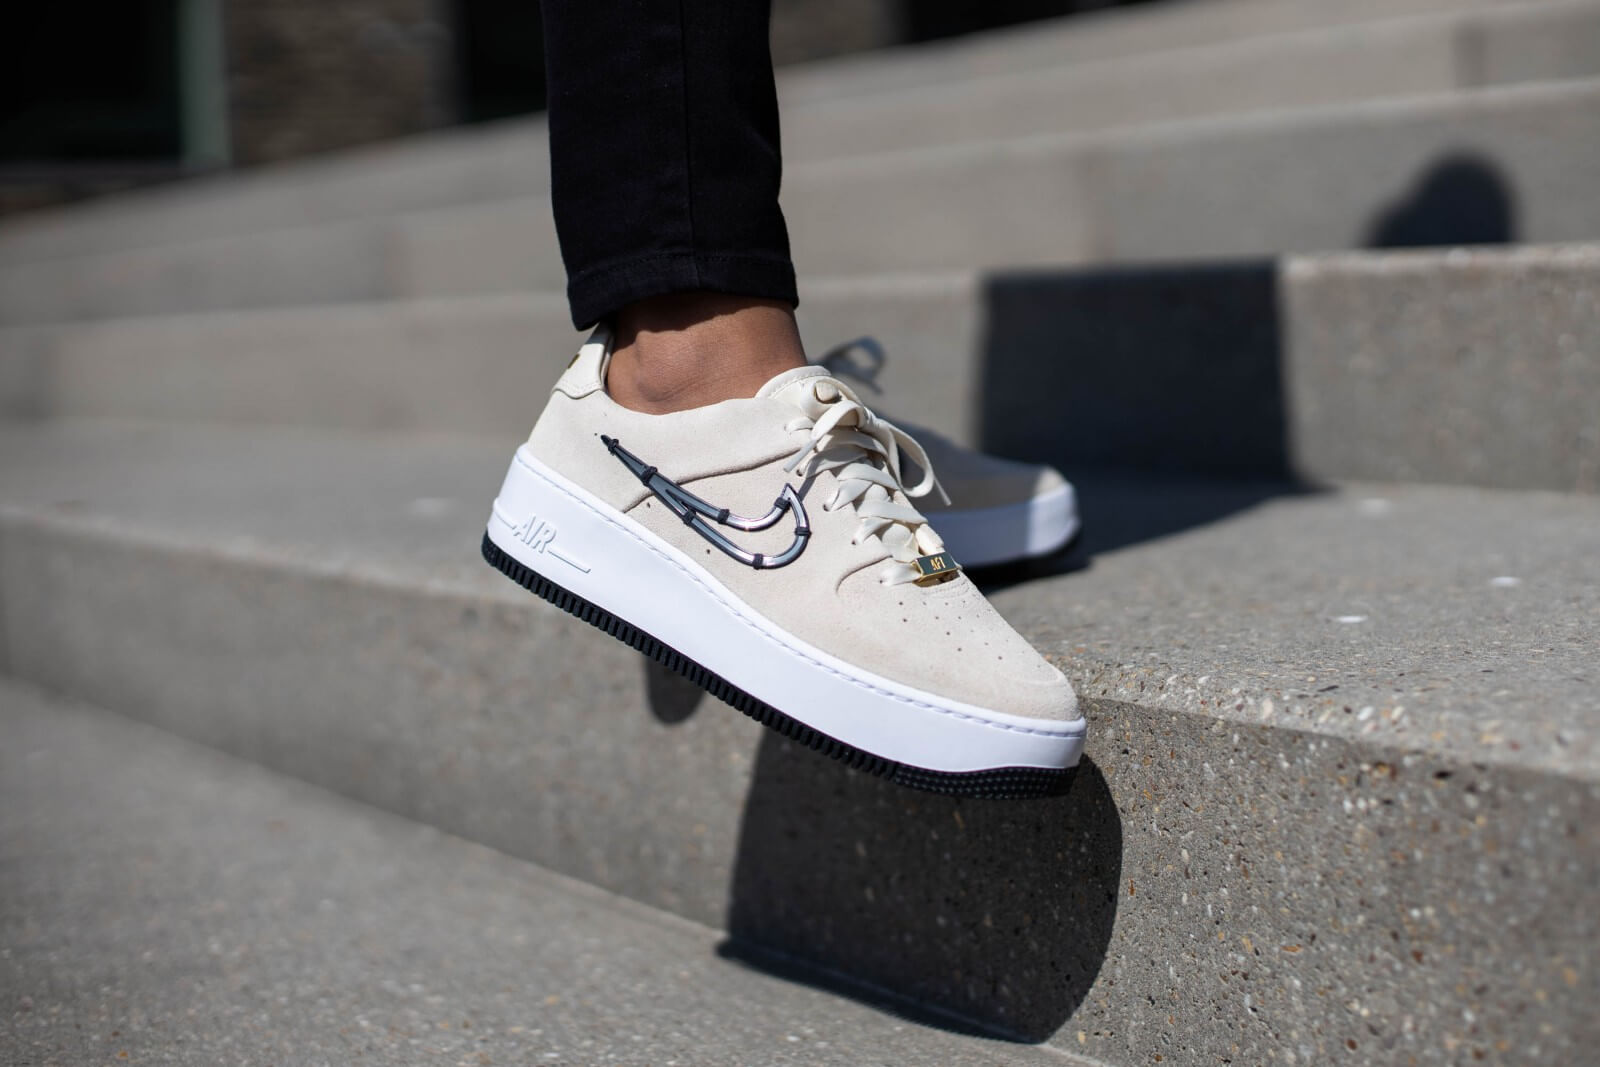 Acuario Meandro Actualizar Shesha Lifestyle on Twitter: "WMNS Nike Air Force 1 Sage Low LX  SOPHISTICATED STREET STYLE. Taking both height and craft to new levels, the Nike  Air Force 1 Sage Low LX features